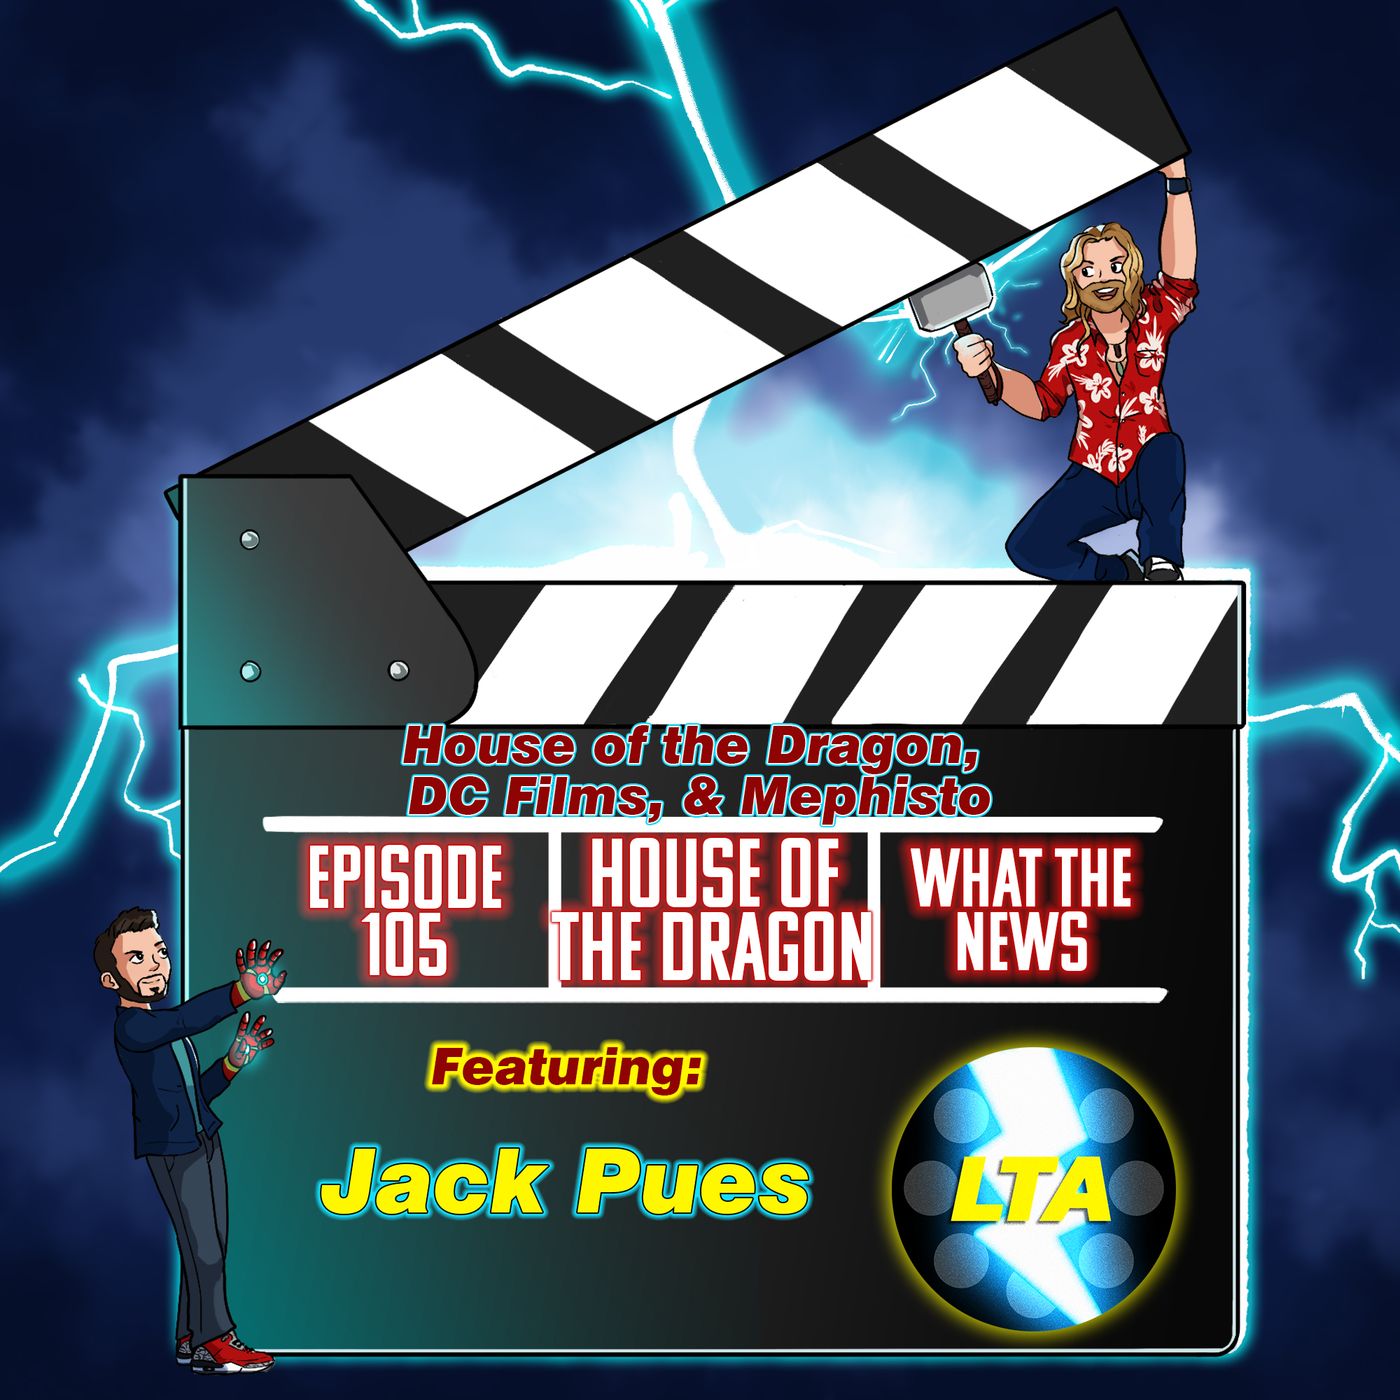 105. House of the Dragon, DC Films, & Mephisto